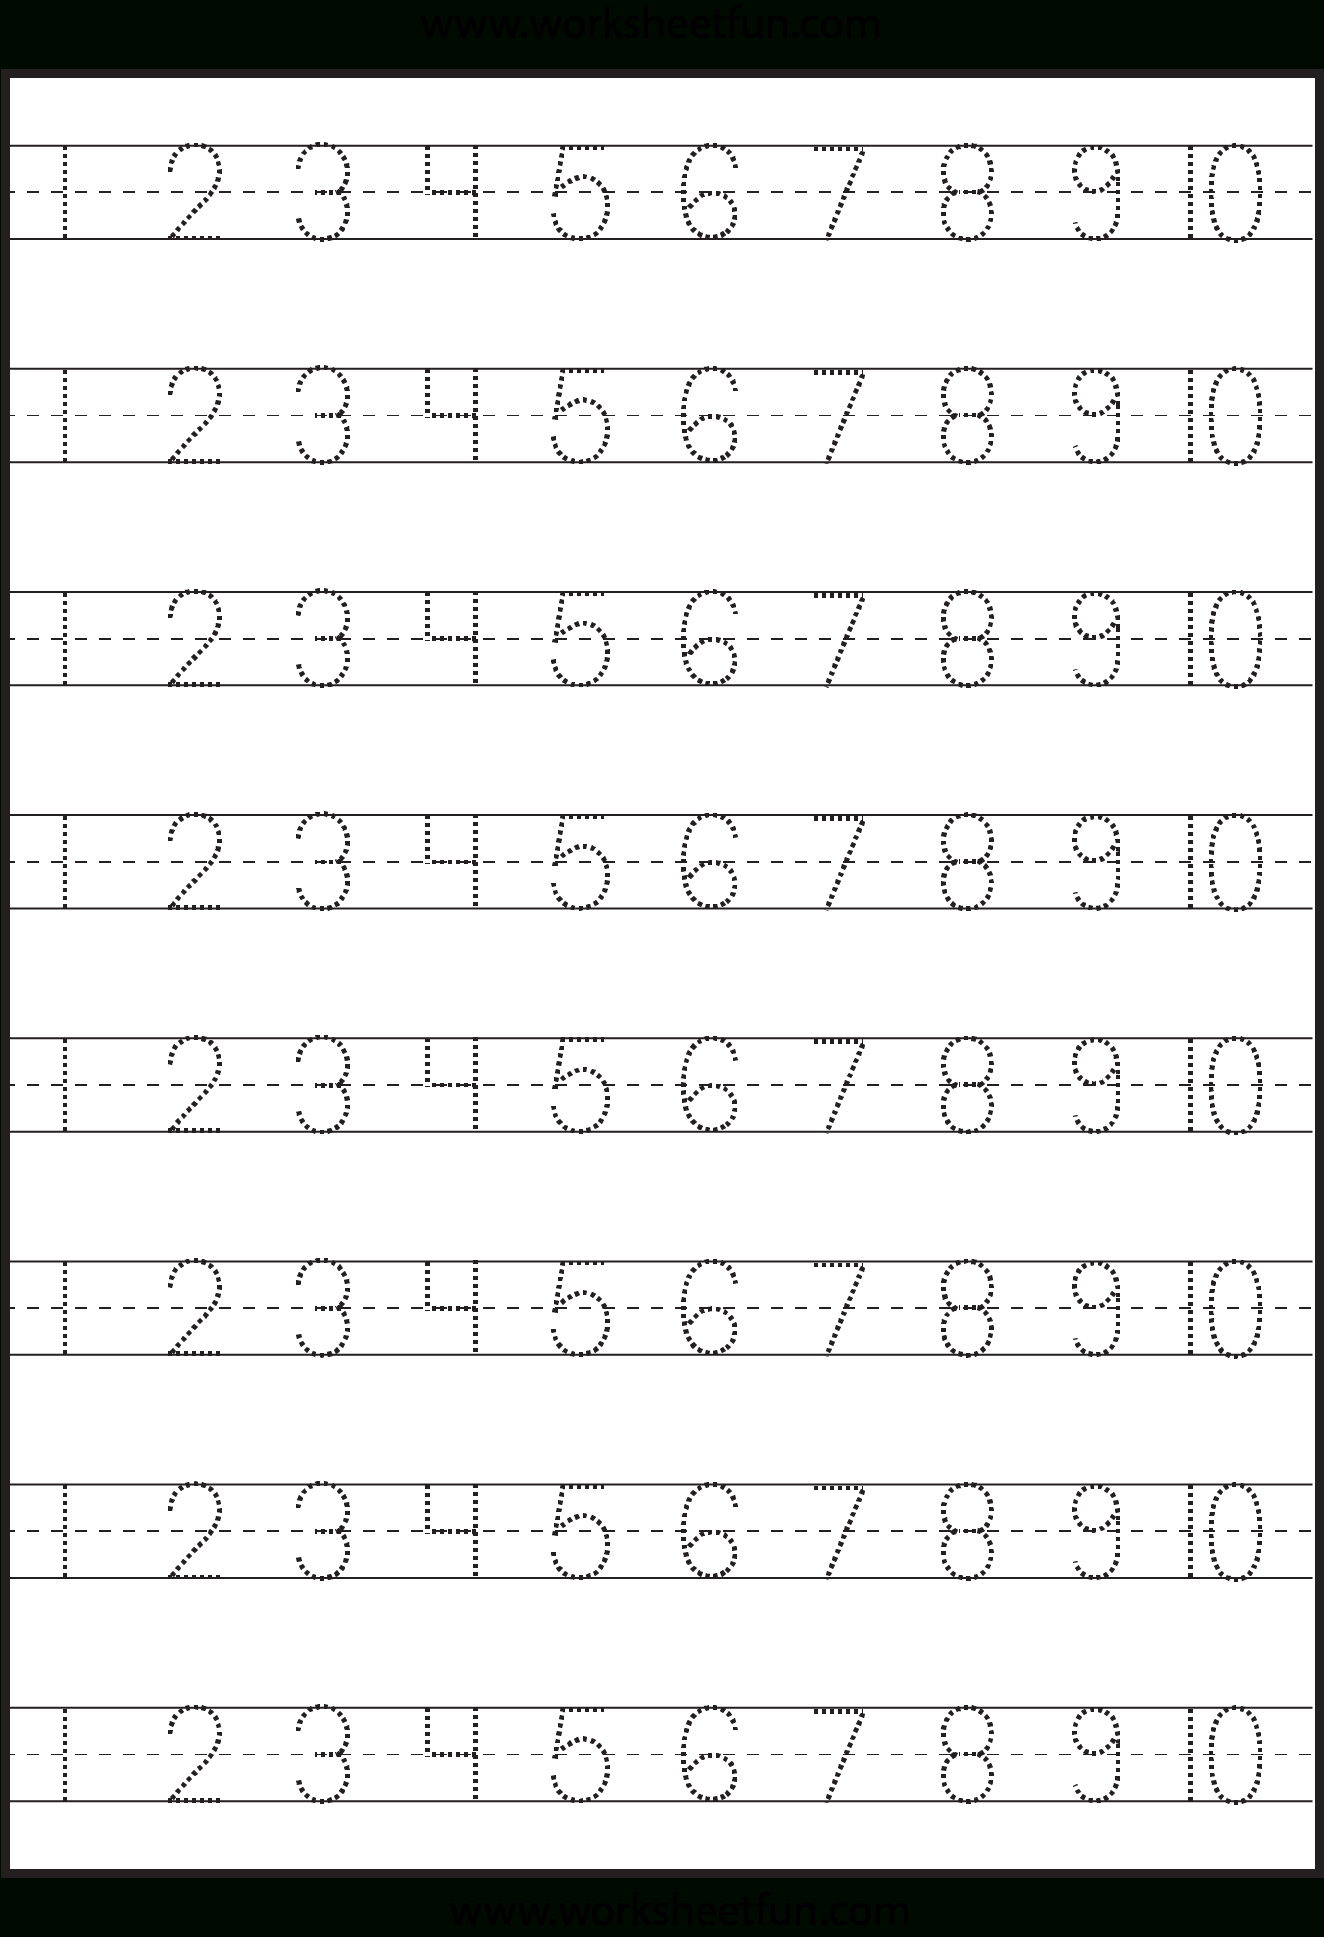 Number Tracing 1-10 - Worksheet | Free Preschool Worksheets pertaining to Tracing Letter 1